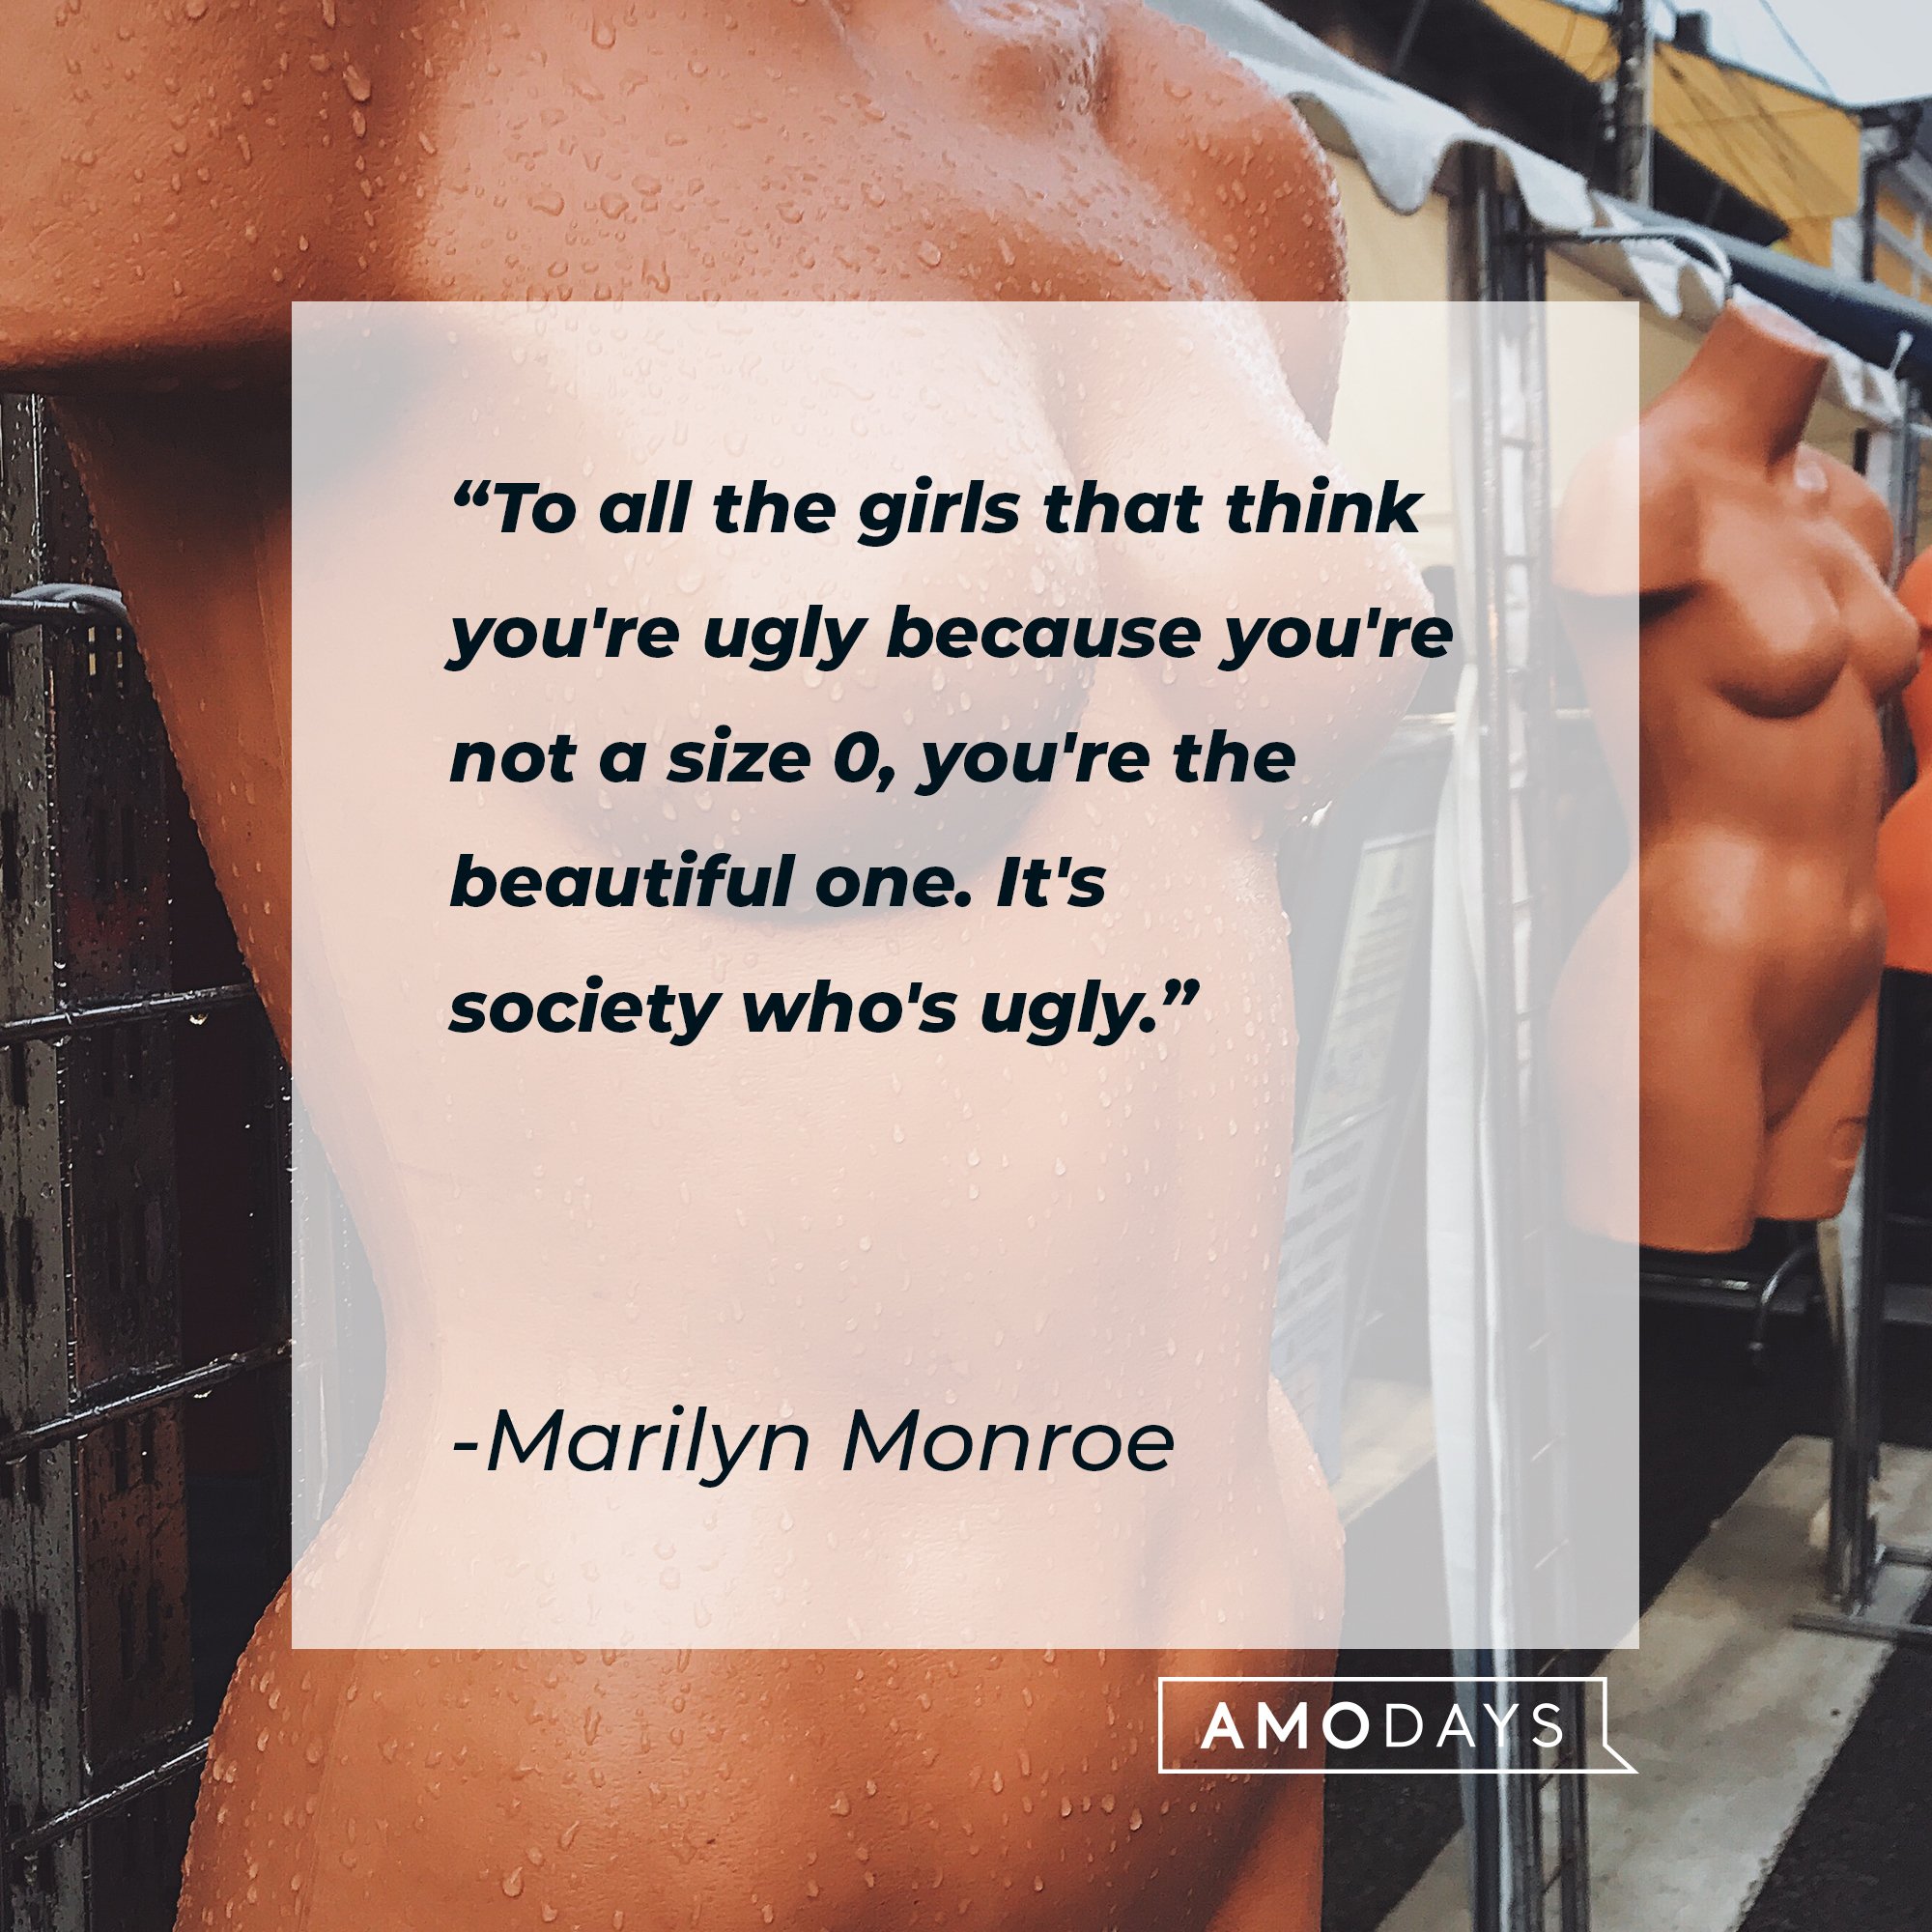 Marilyn Monroe’s quote: "To all the girls that think you're ugly because you're not a size 0, you're the beautiful one. It's society who's ugly." | Image: AmoDays